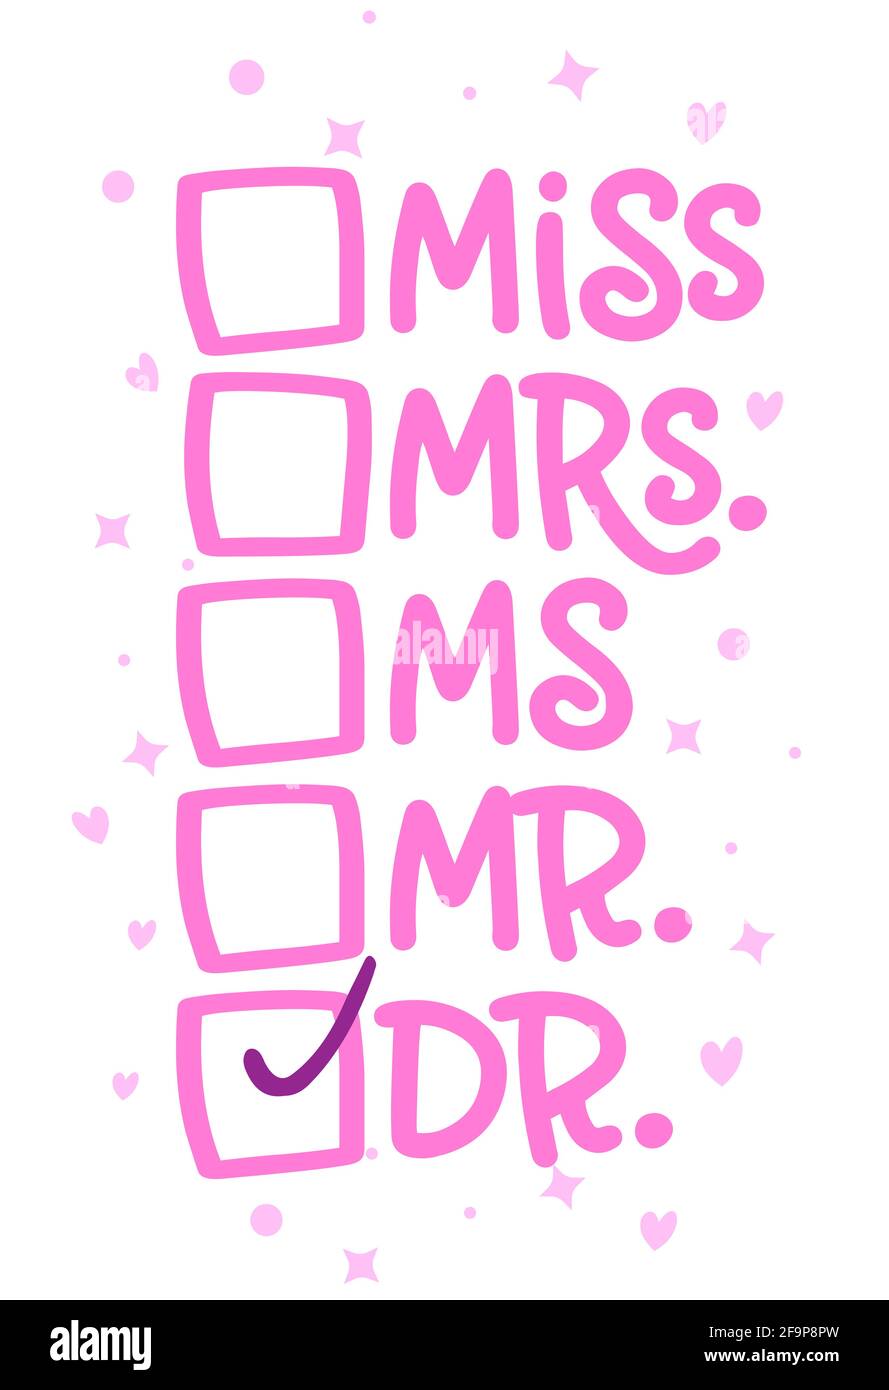 Mr mrs miss Stock Vector Images - Alamy